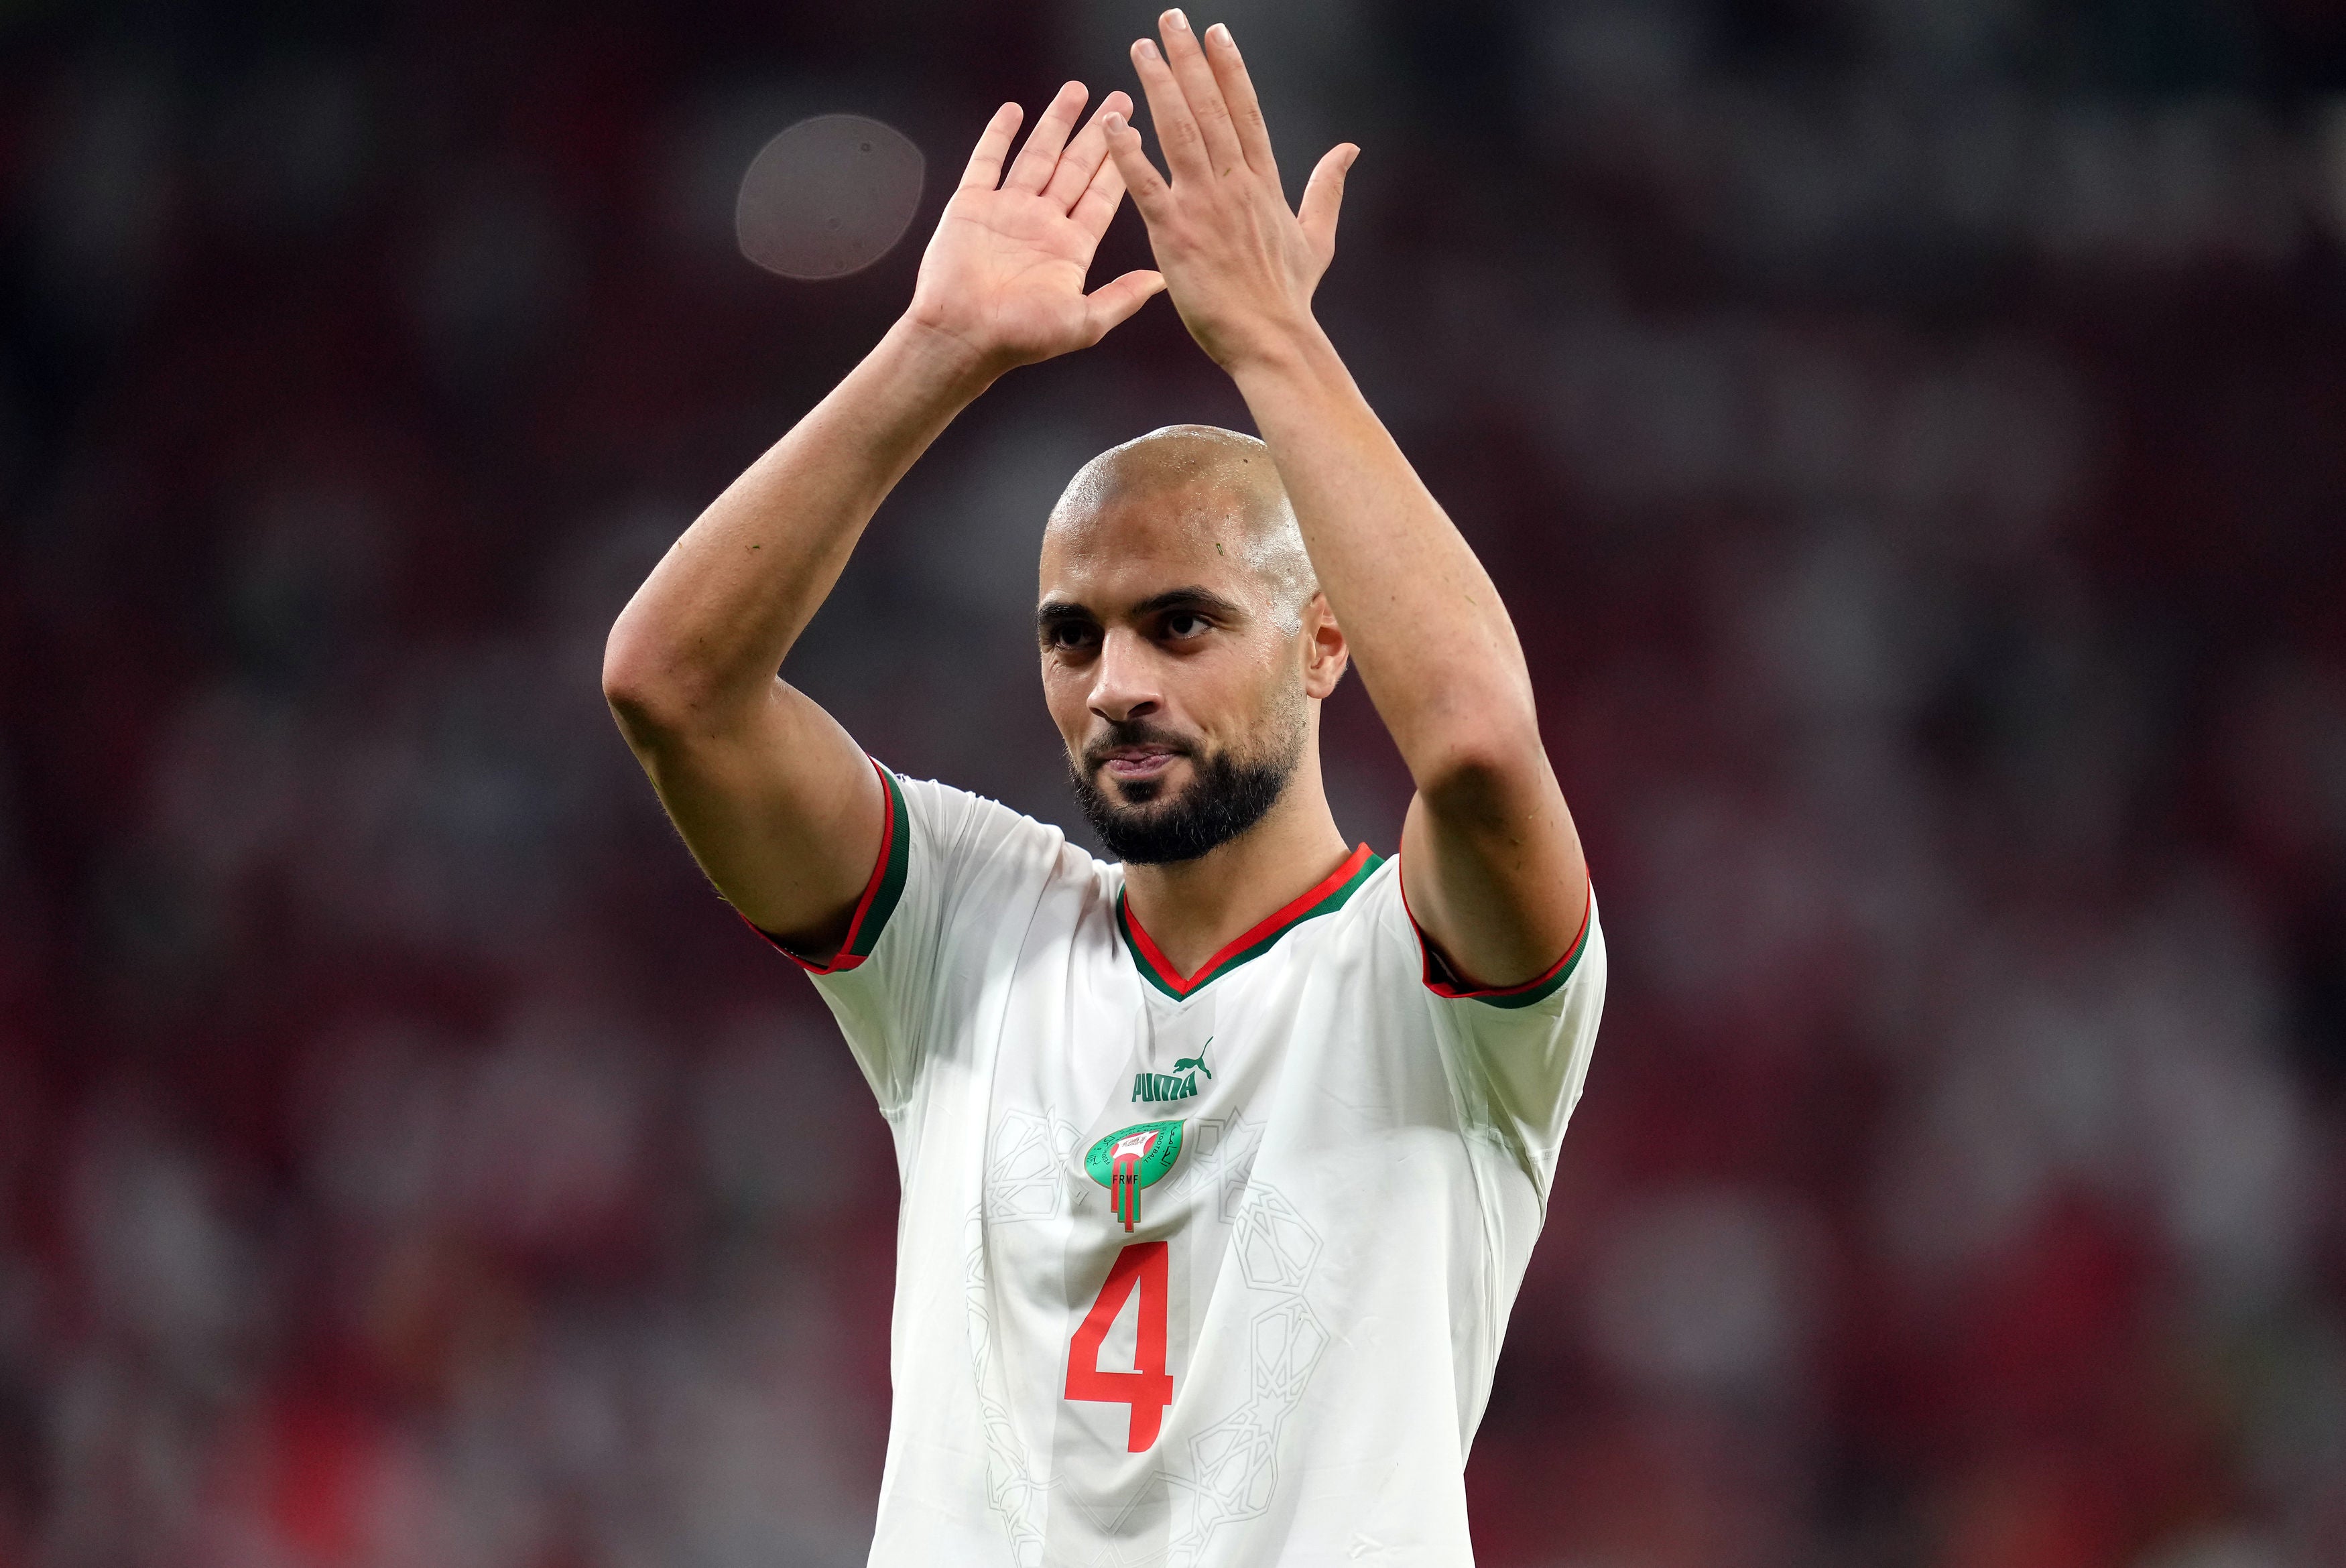 Manchester United are hoping to complete a loan signing for Morocco star Sofyan Amrabat